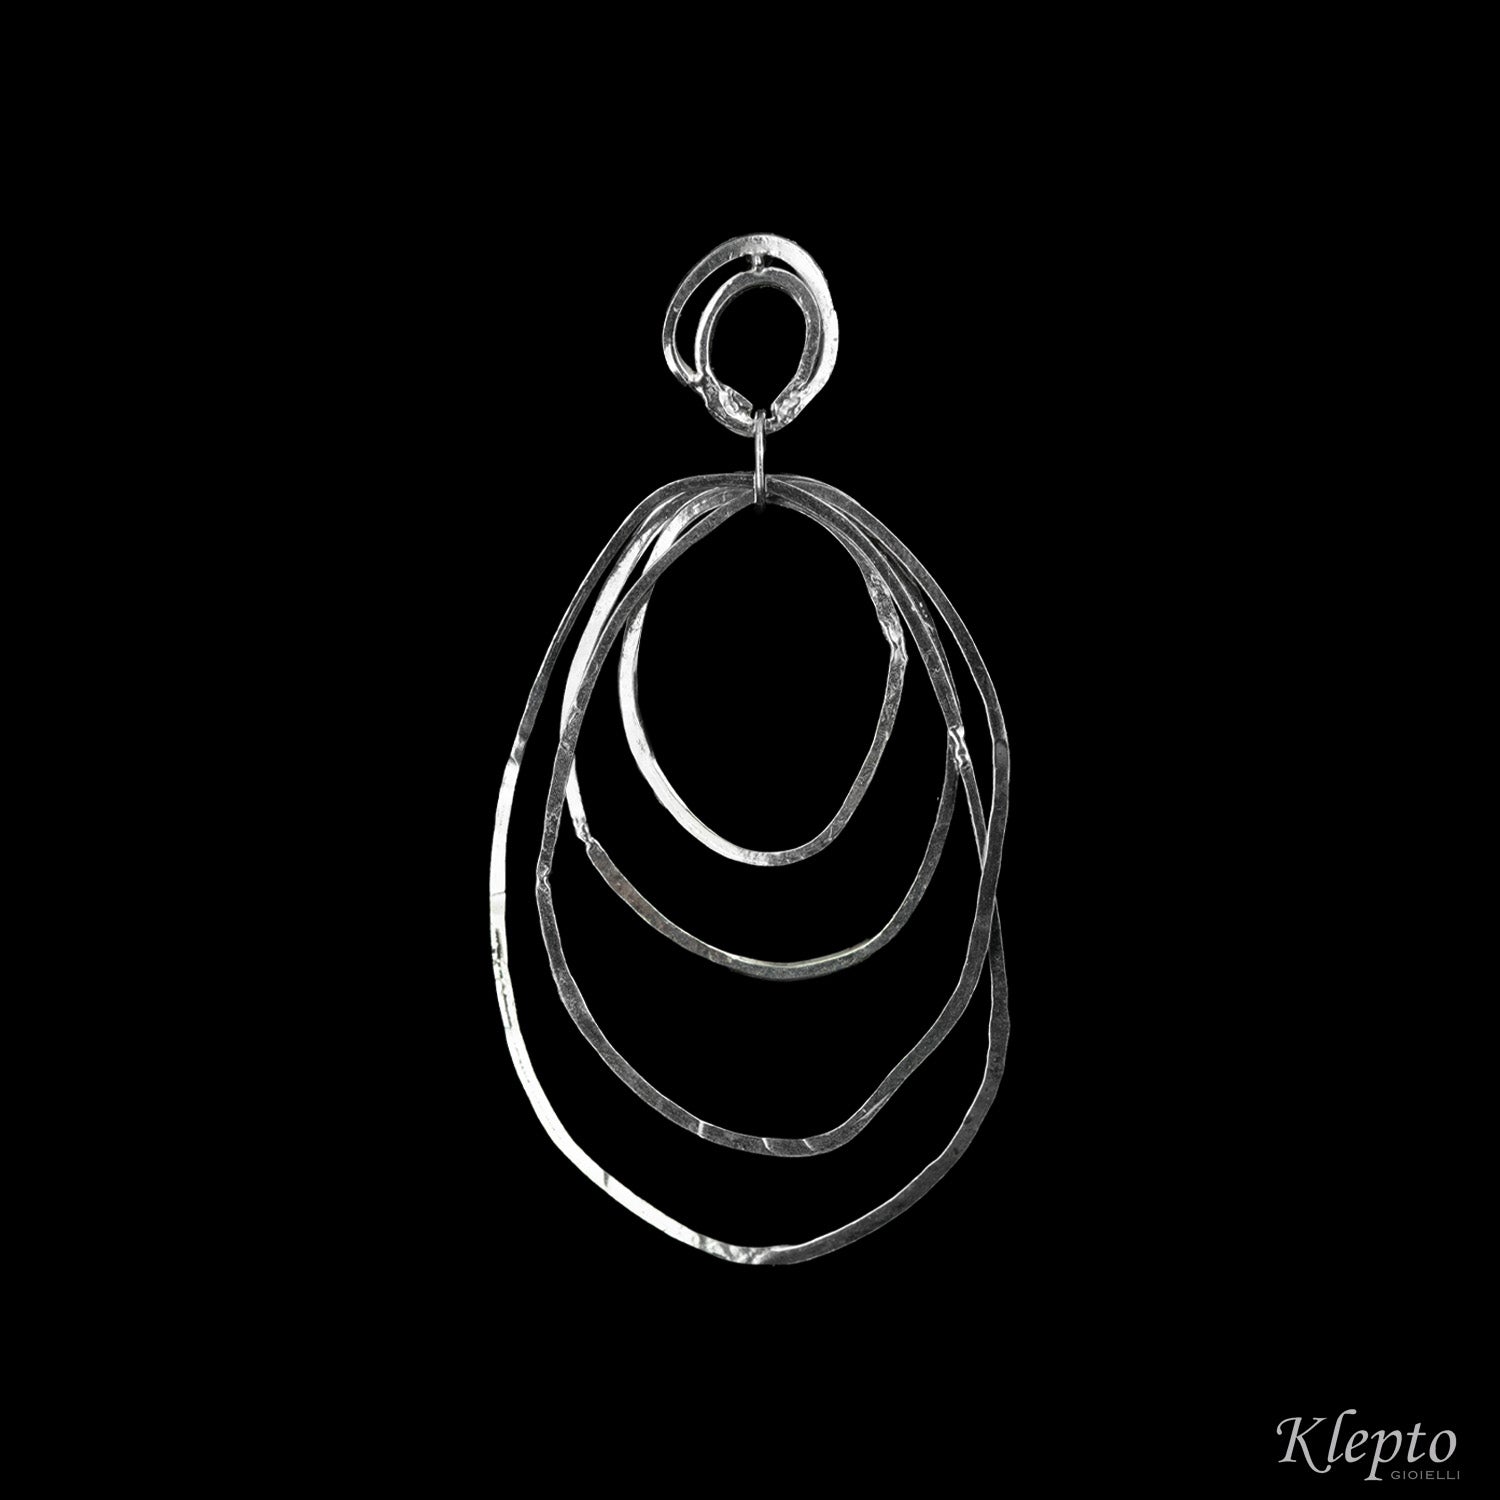 Earrings in Silnova® Silver with hammered wire